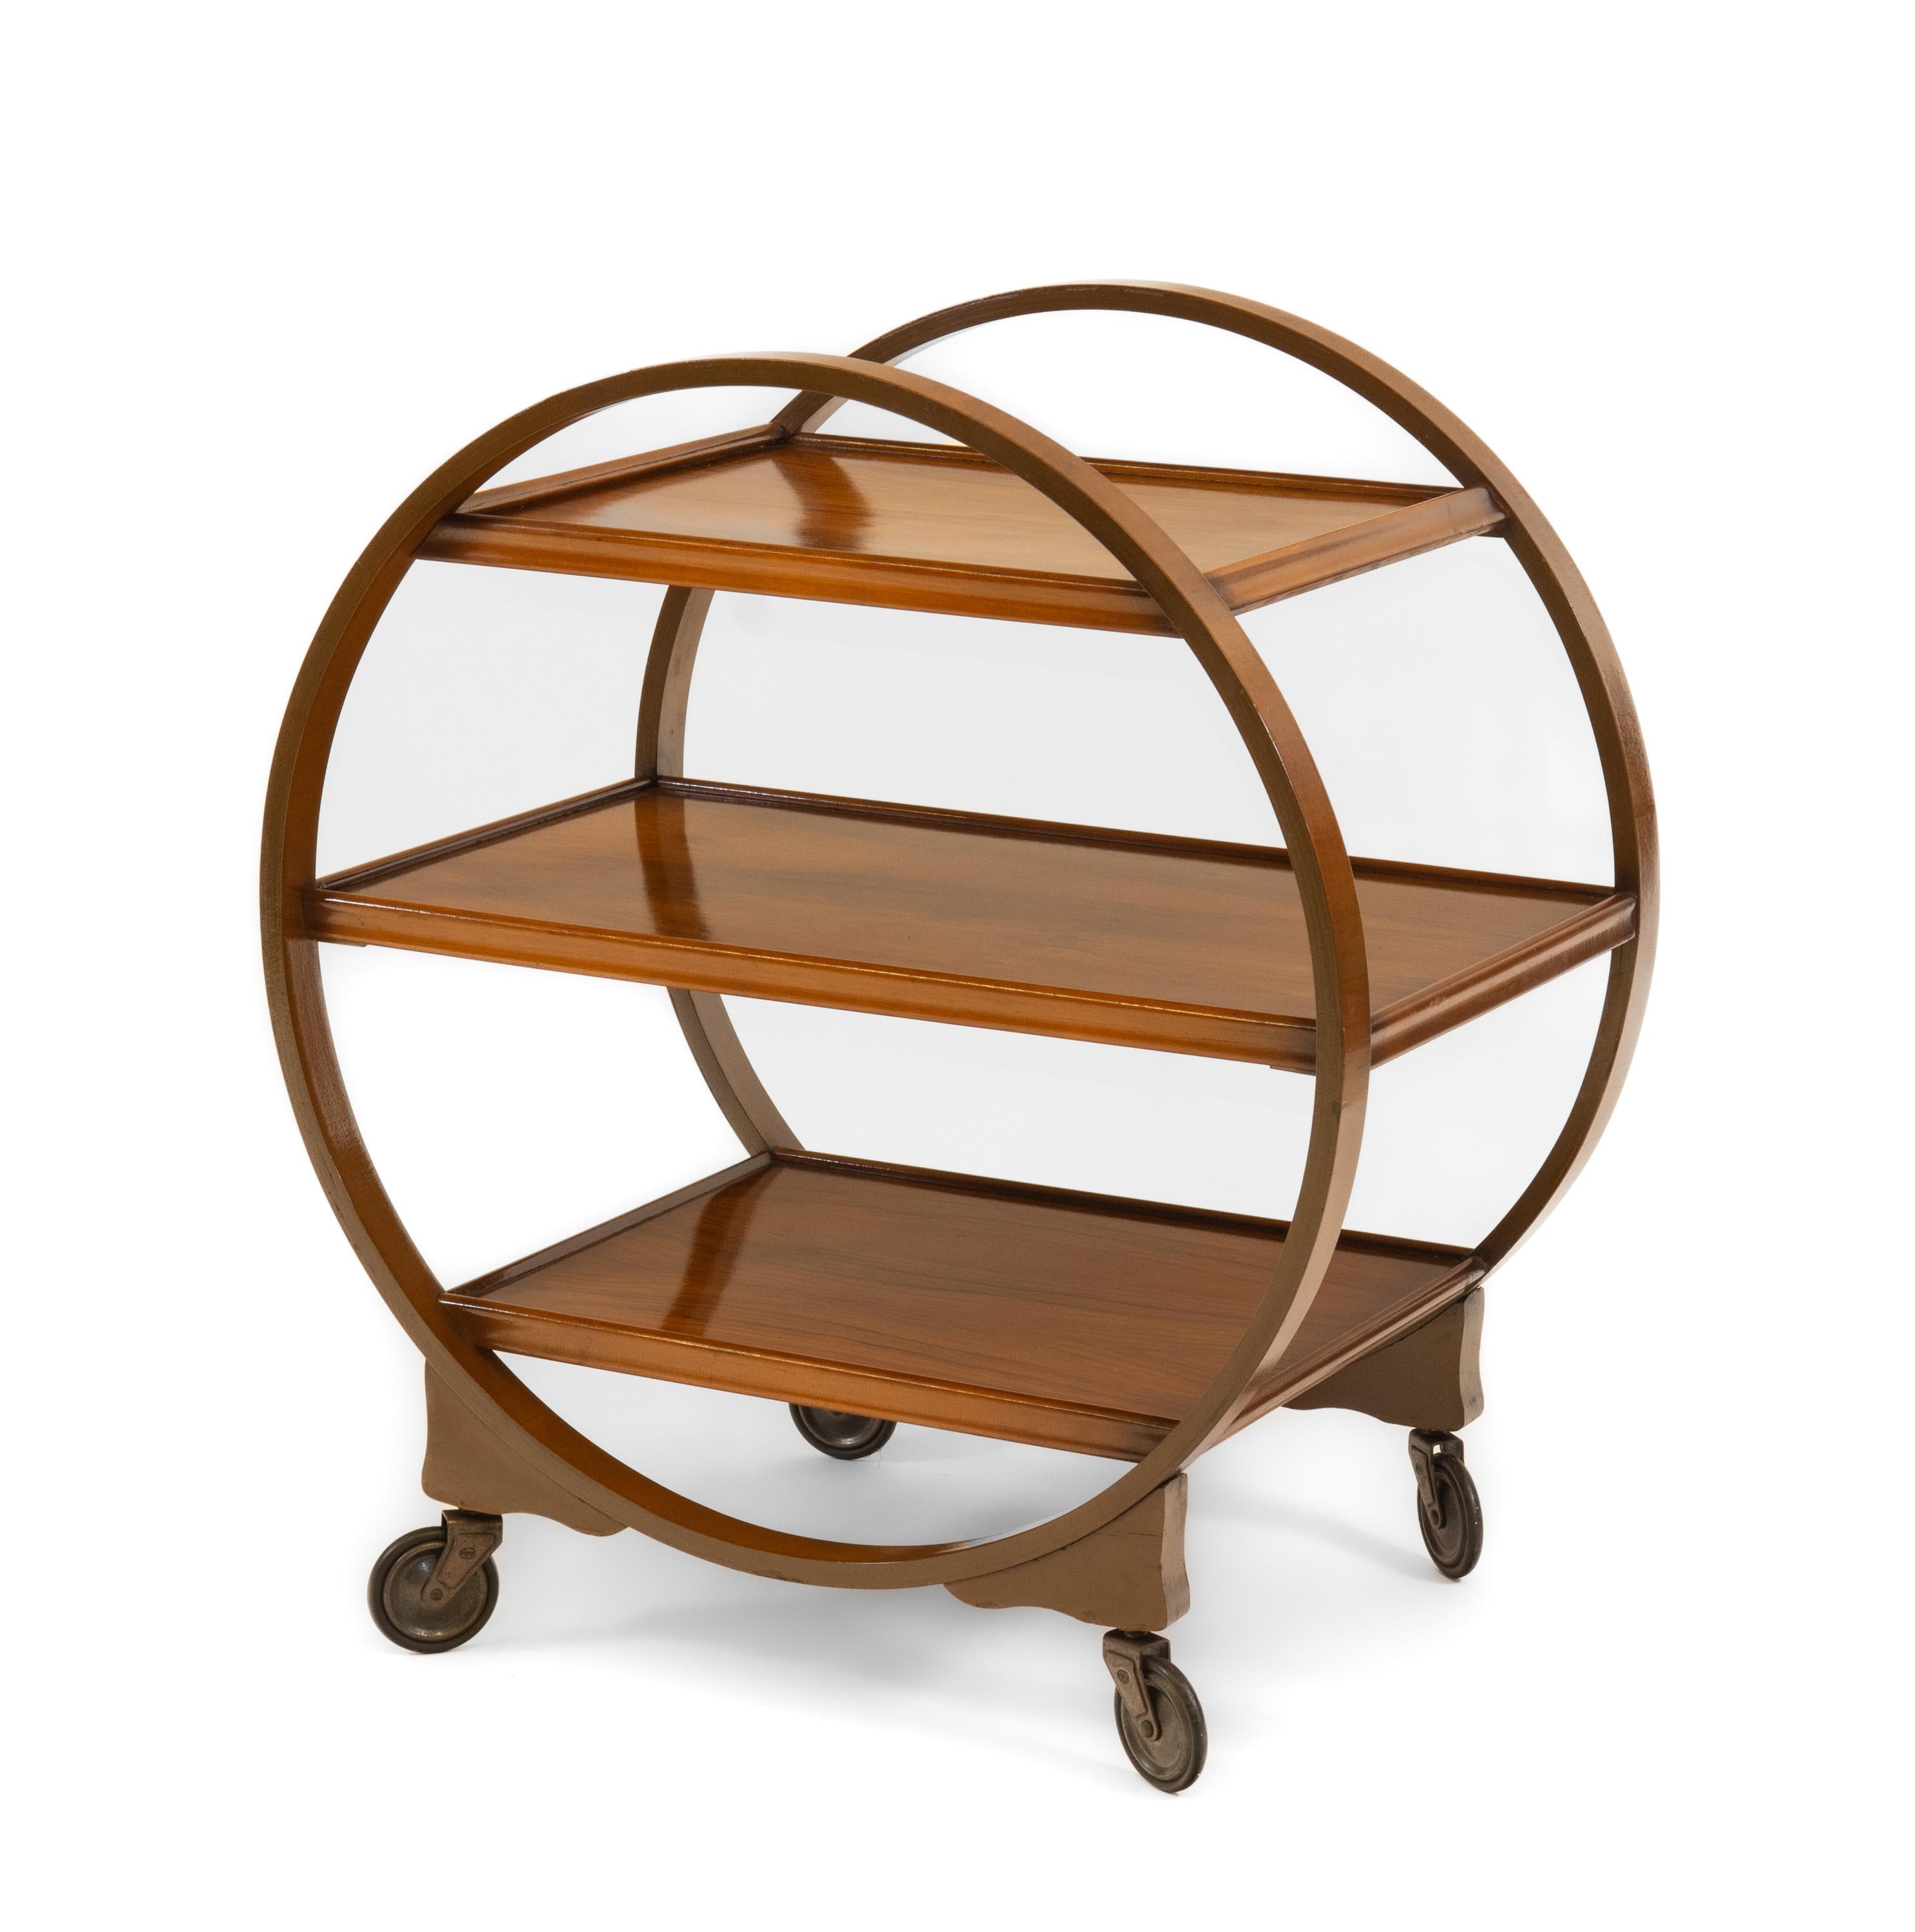 1930s English Art Deco Walnut Round Drinks Cocktail Trolley Modernist Bar Cart In Good Condition For Sale In Norwich, GB